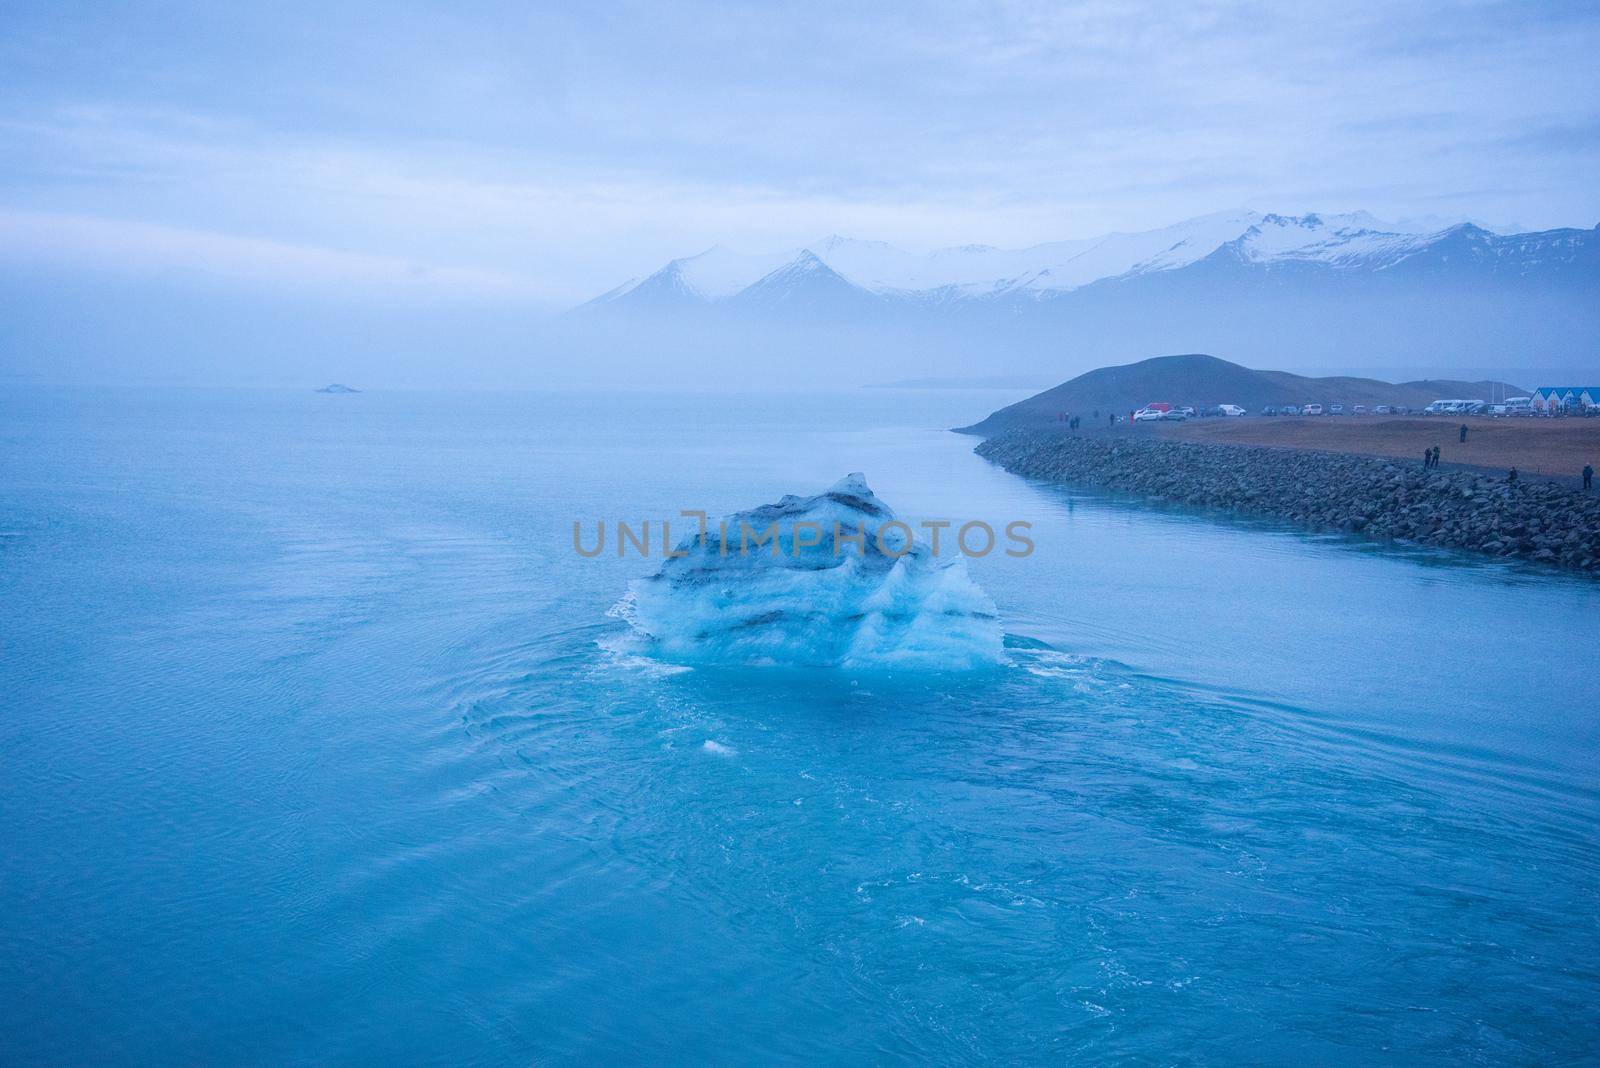 Icelandic glacier floating from global warming effects. Foggy atmosphere with snowcapped mountain range in the distance. Iceberg has layers of volcanic ash.